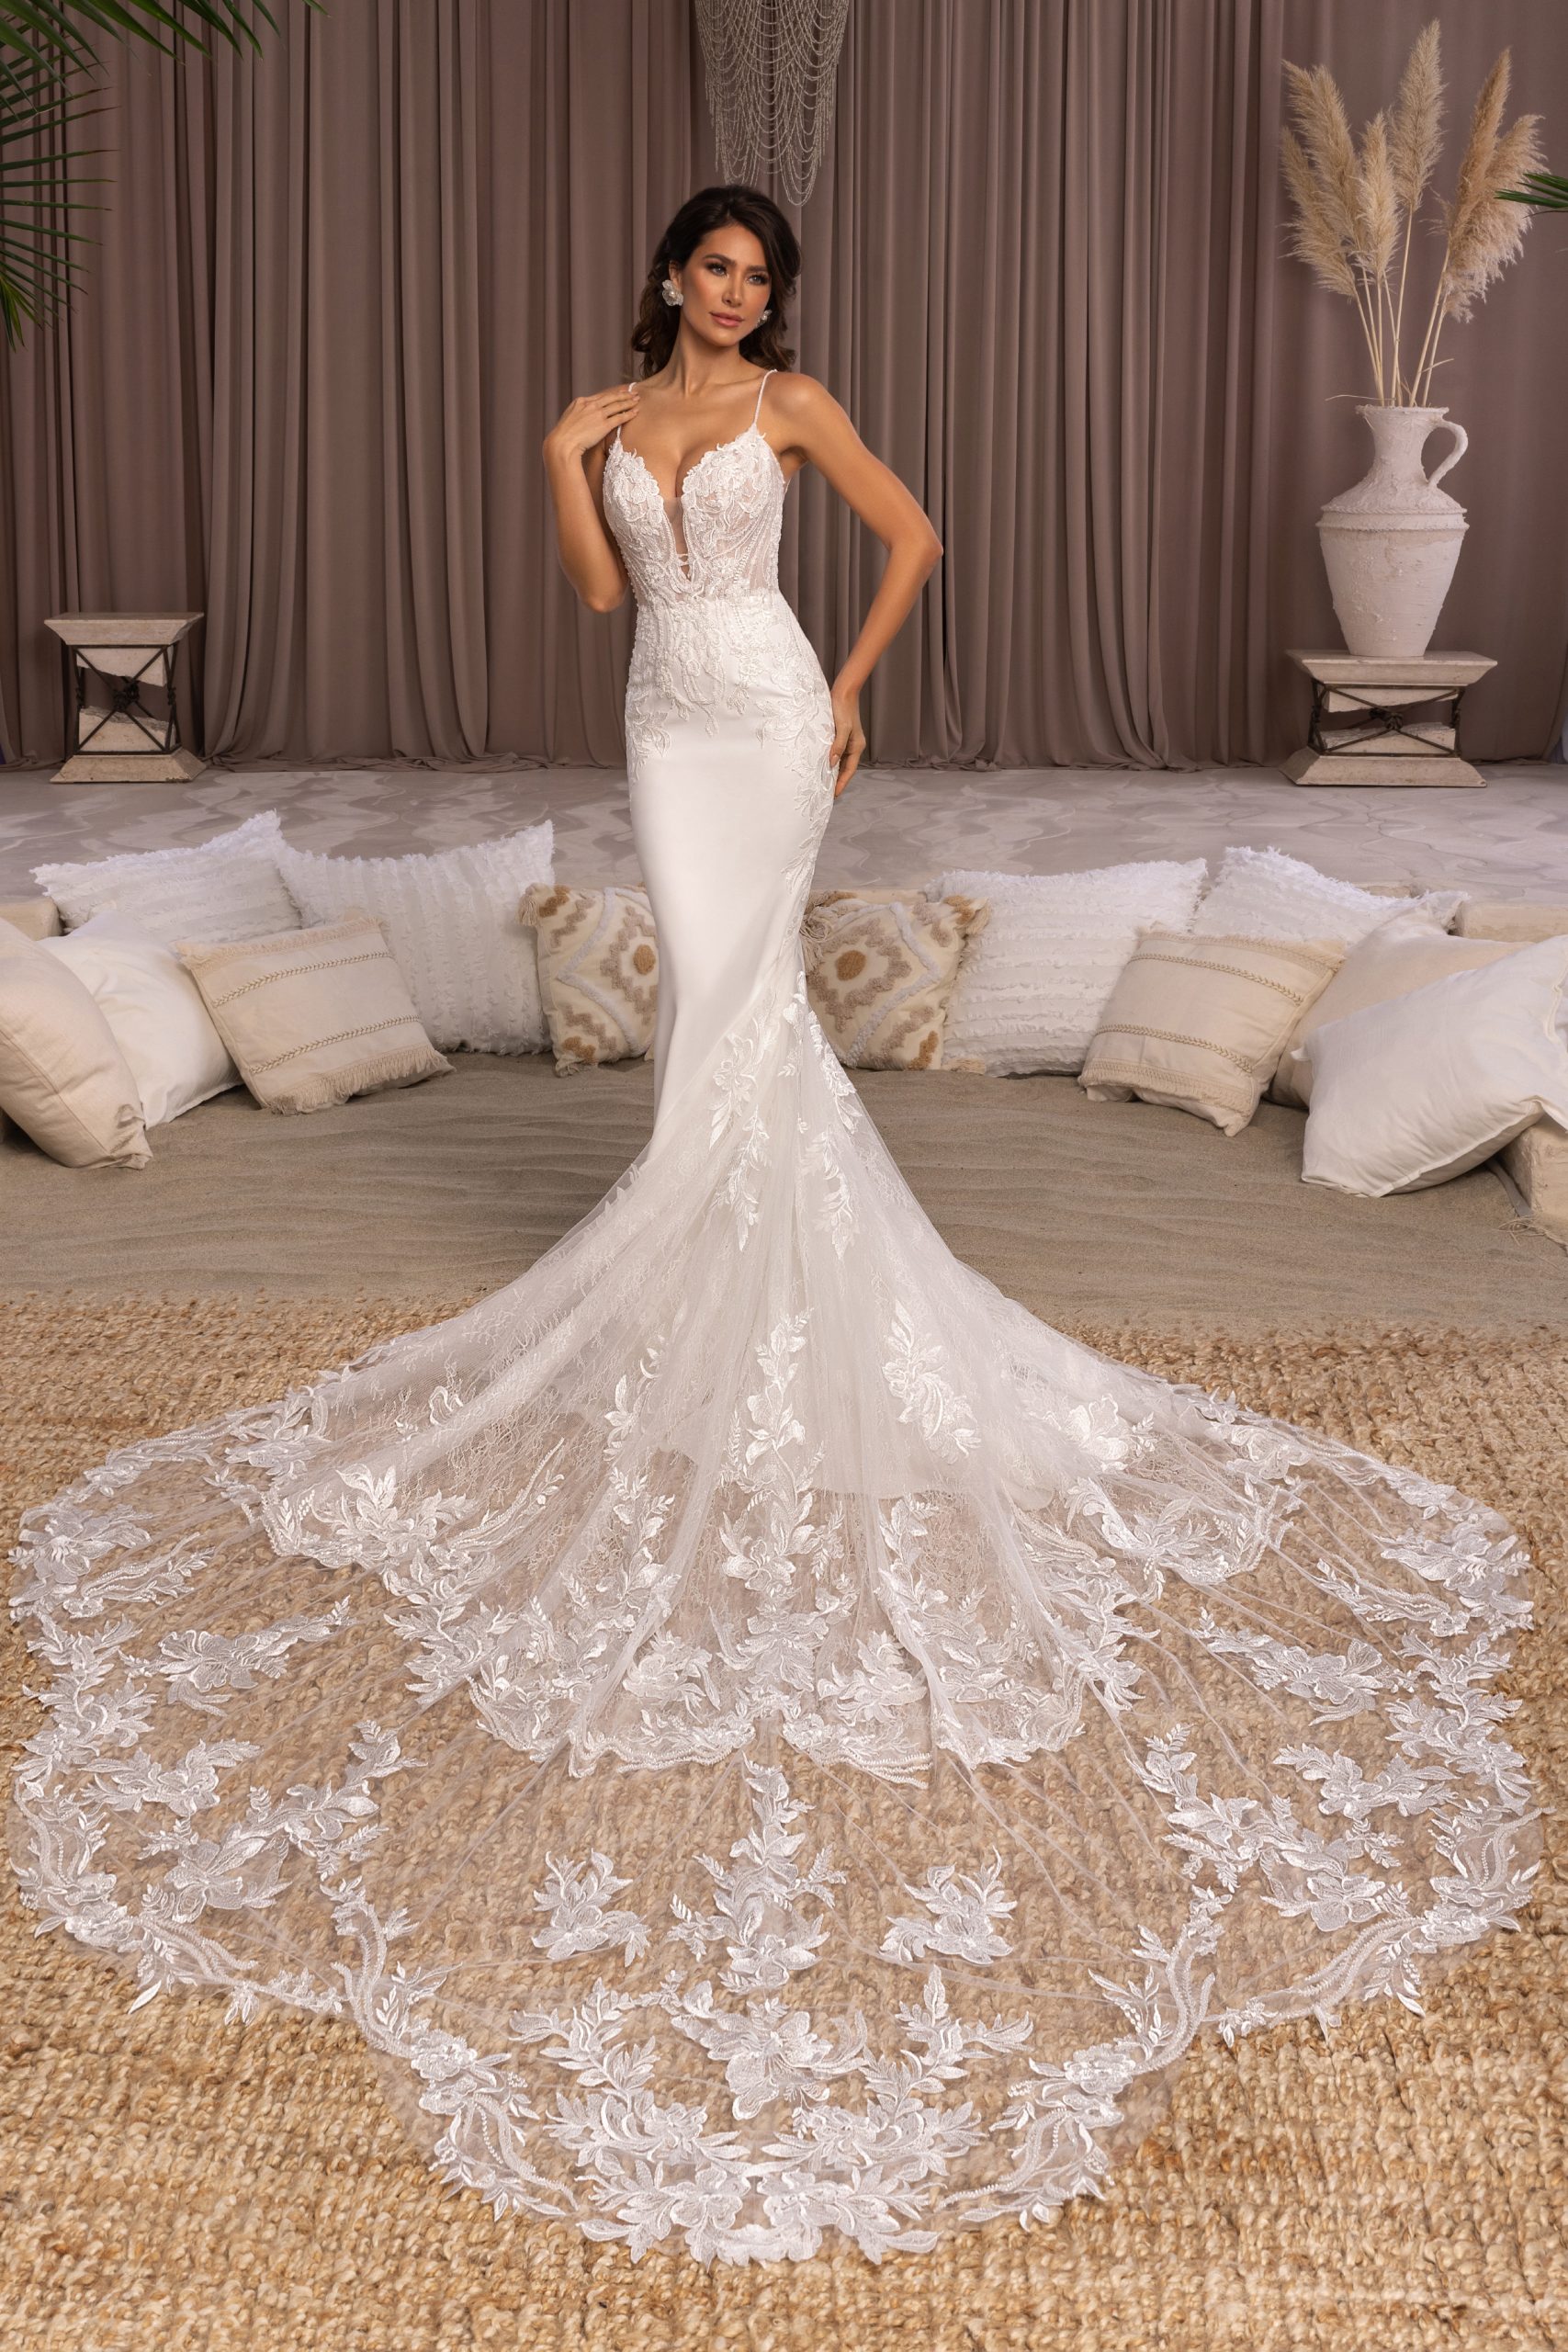 BLAKELY – Wedding Dresses, Bridal Gowns